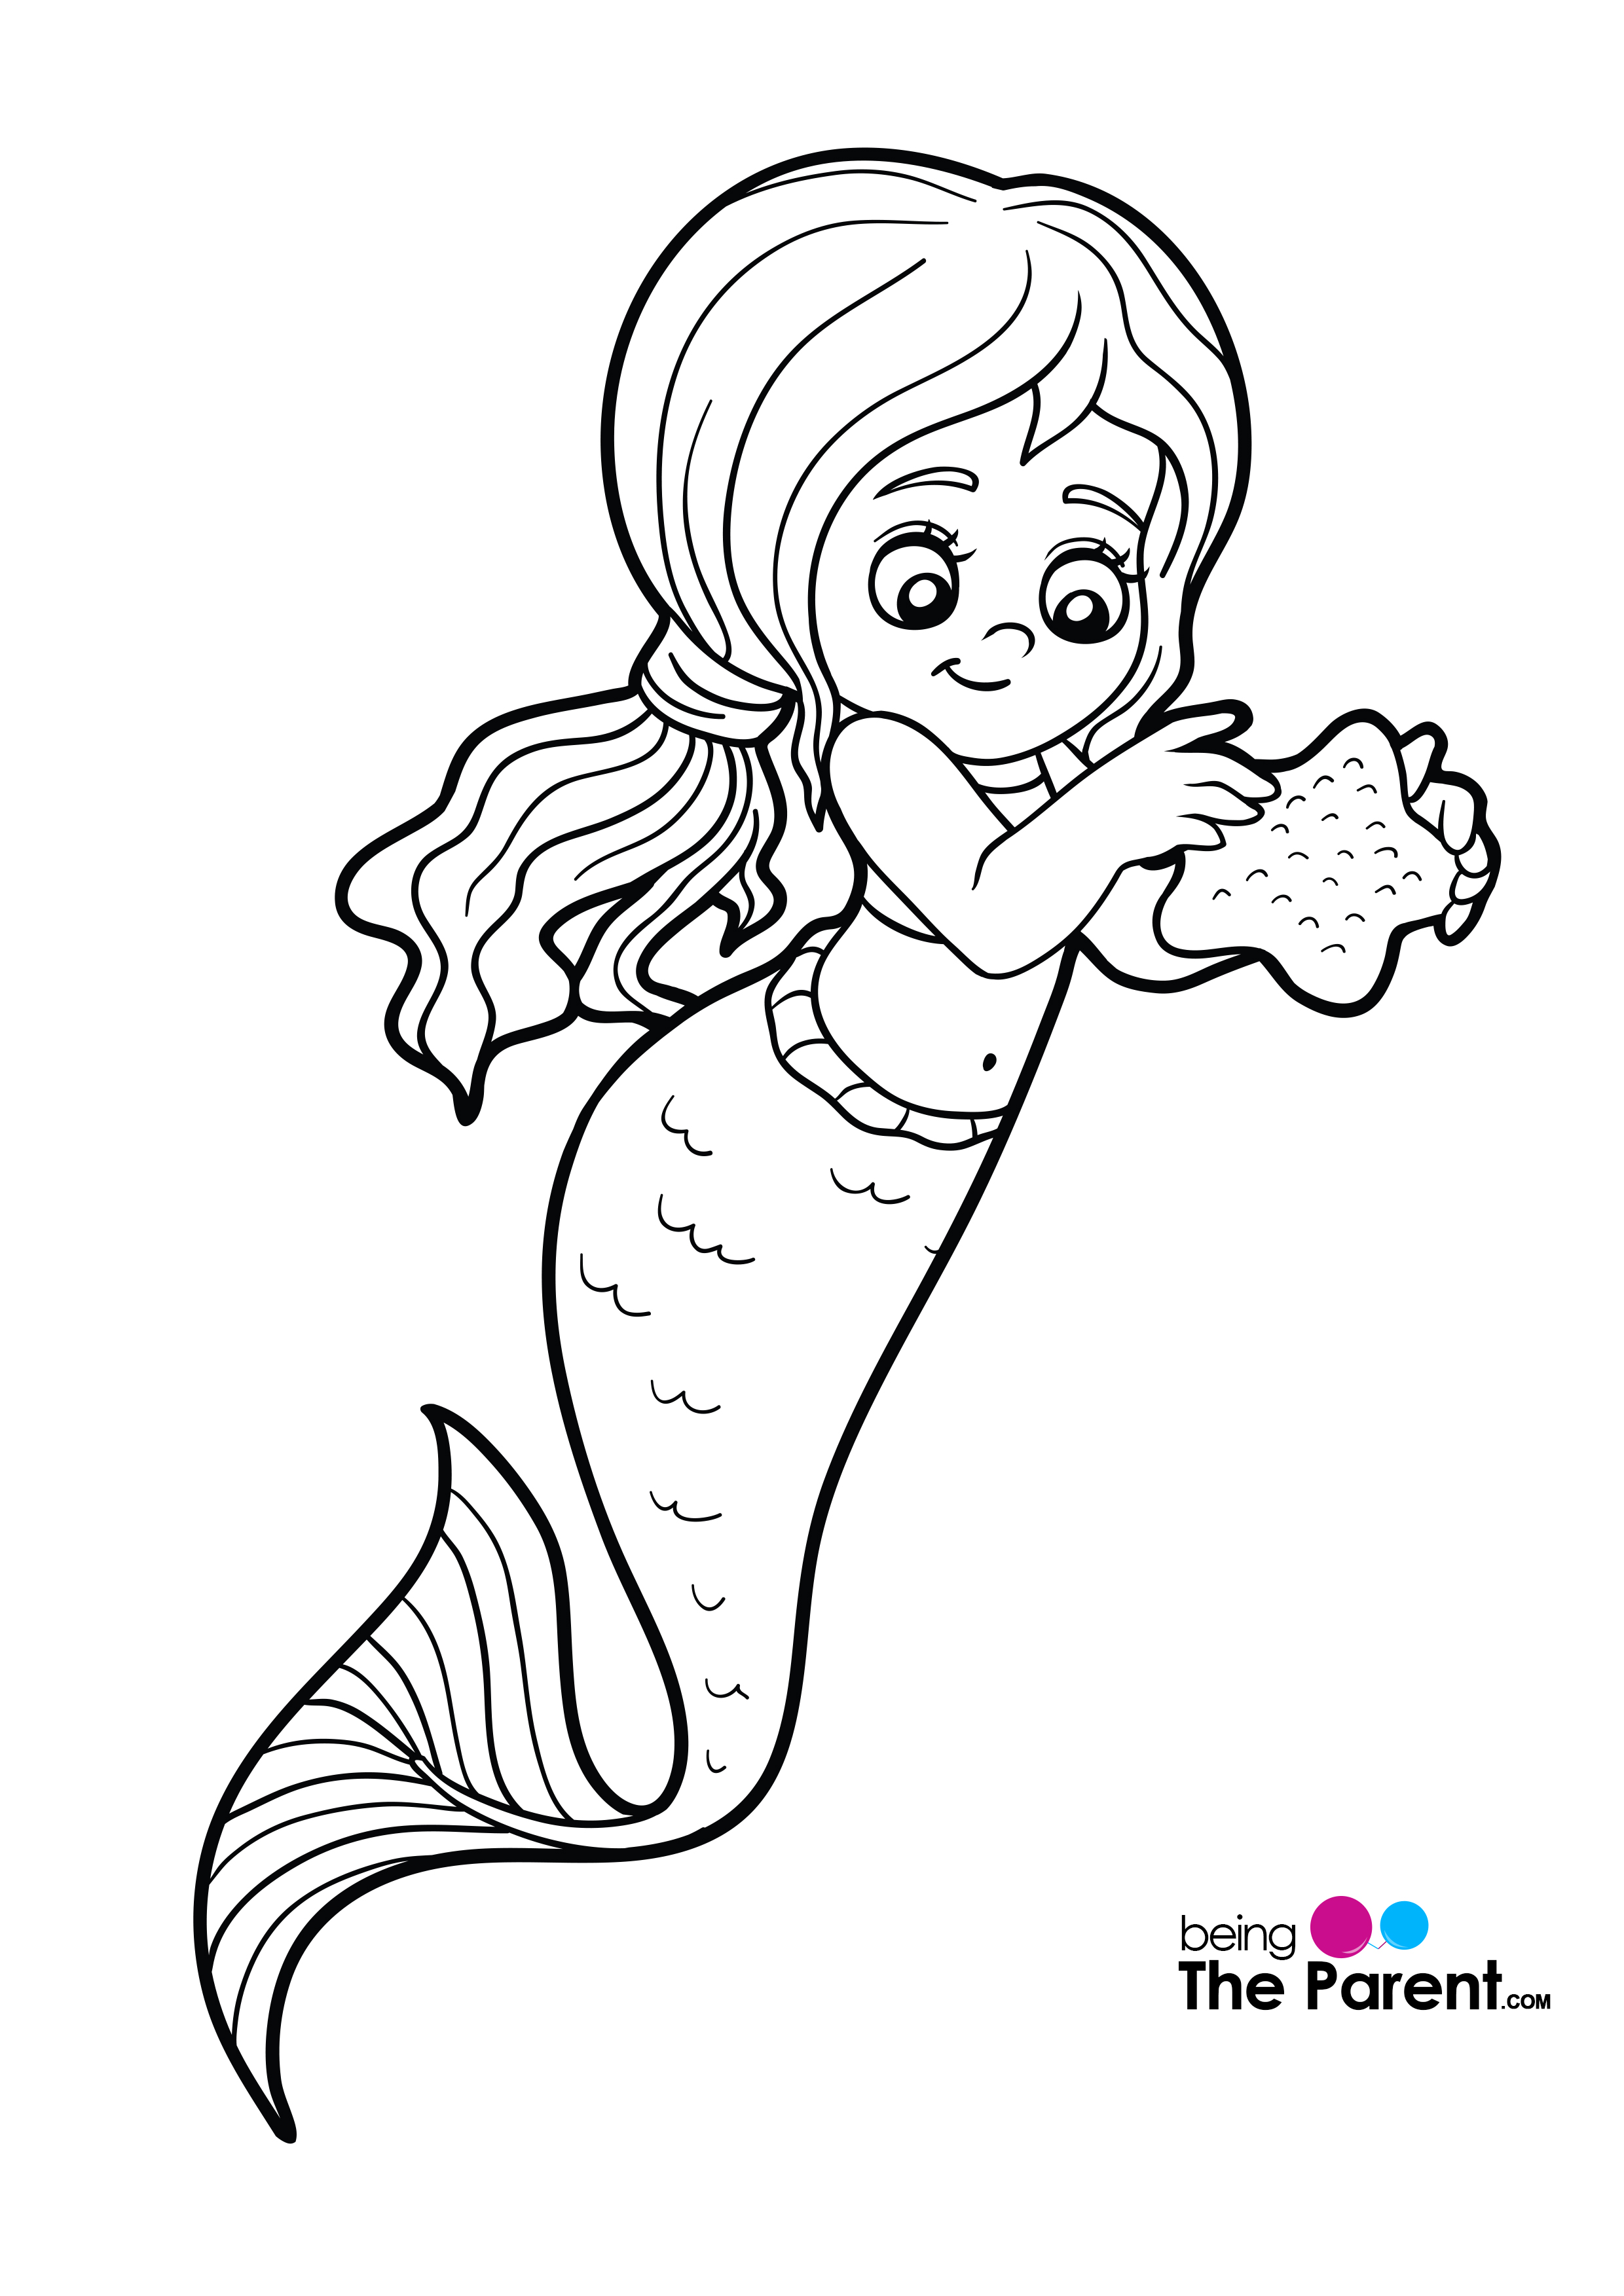 Real Mermaid Coloring Pages at GetColorings.com | Free printable colorings pages to print and color